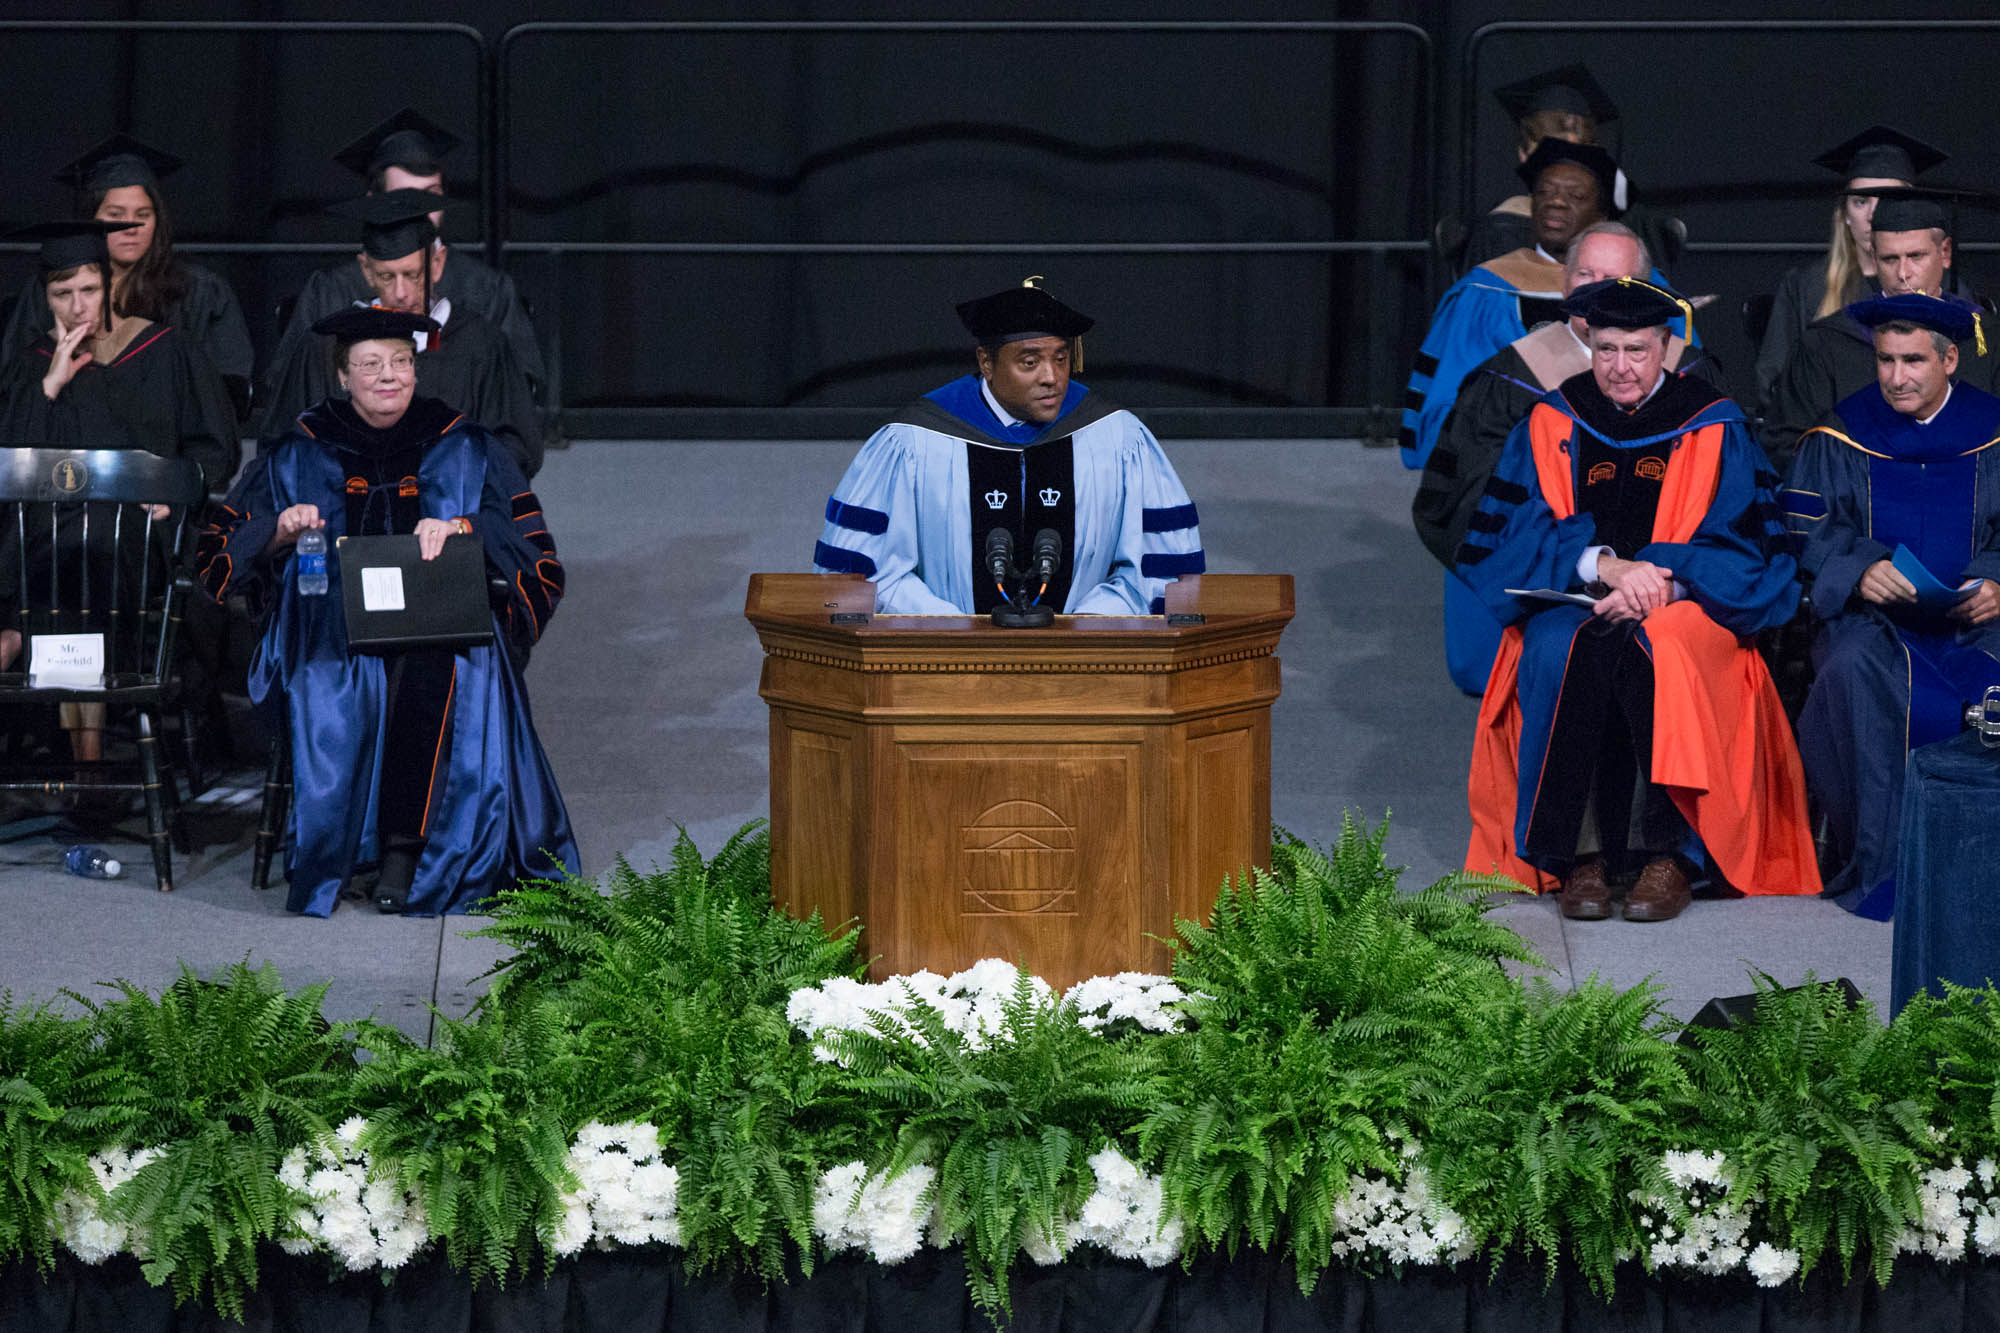 Milton Adams speaking to students from a podium dressed in graduation hat and gown